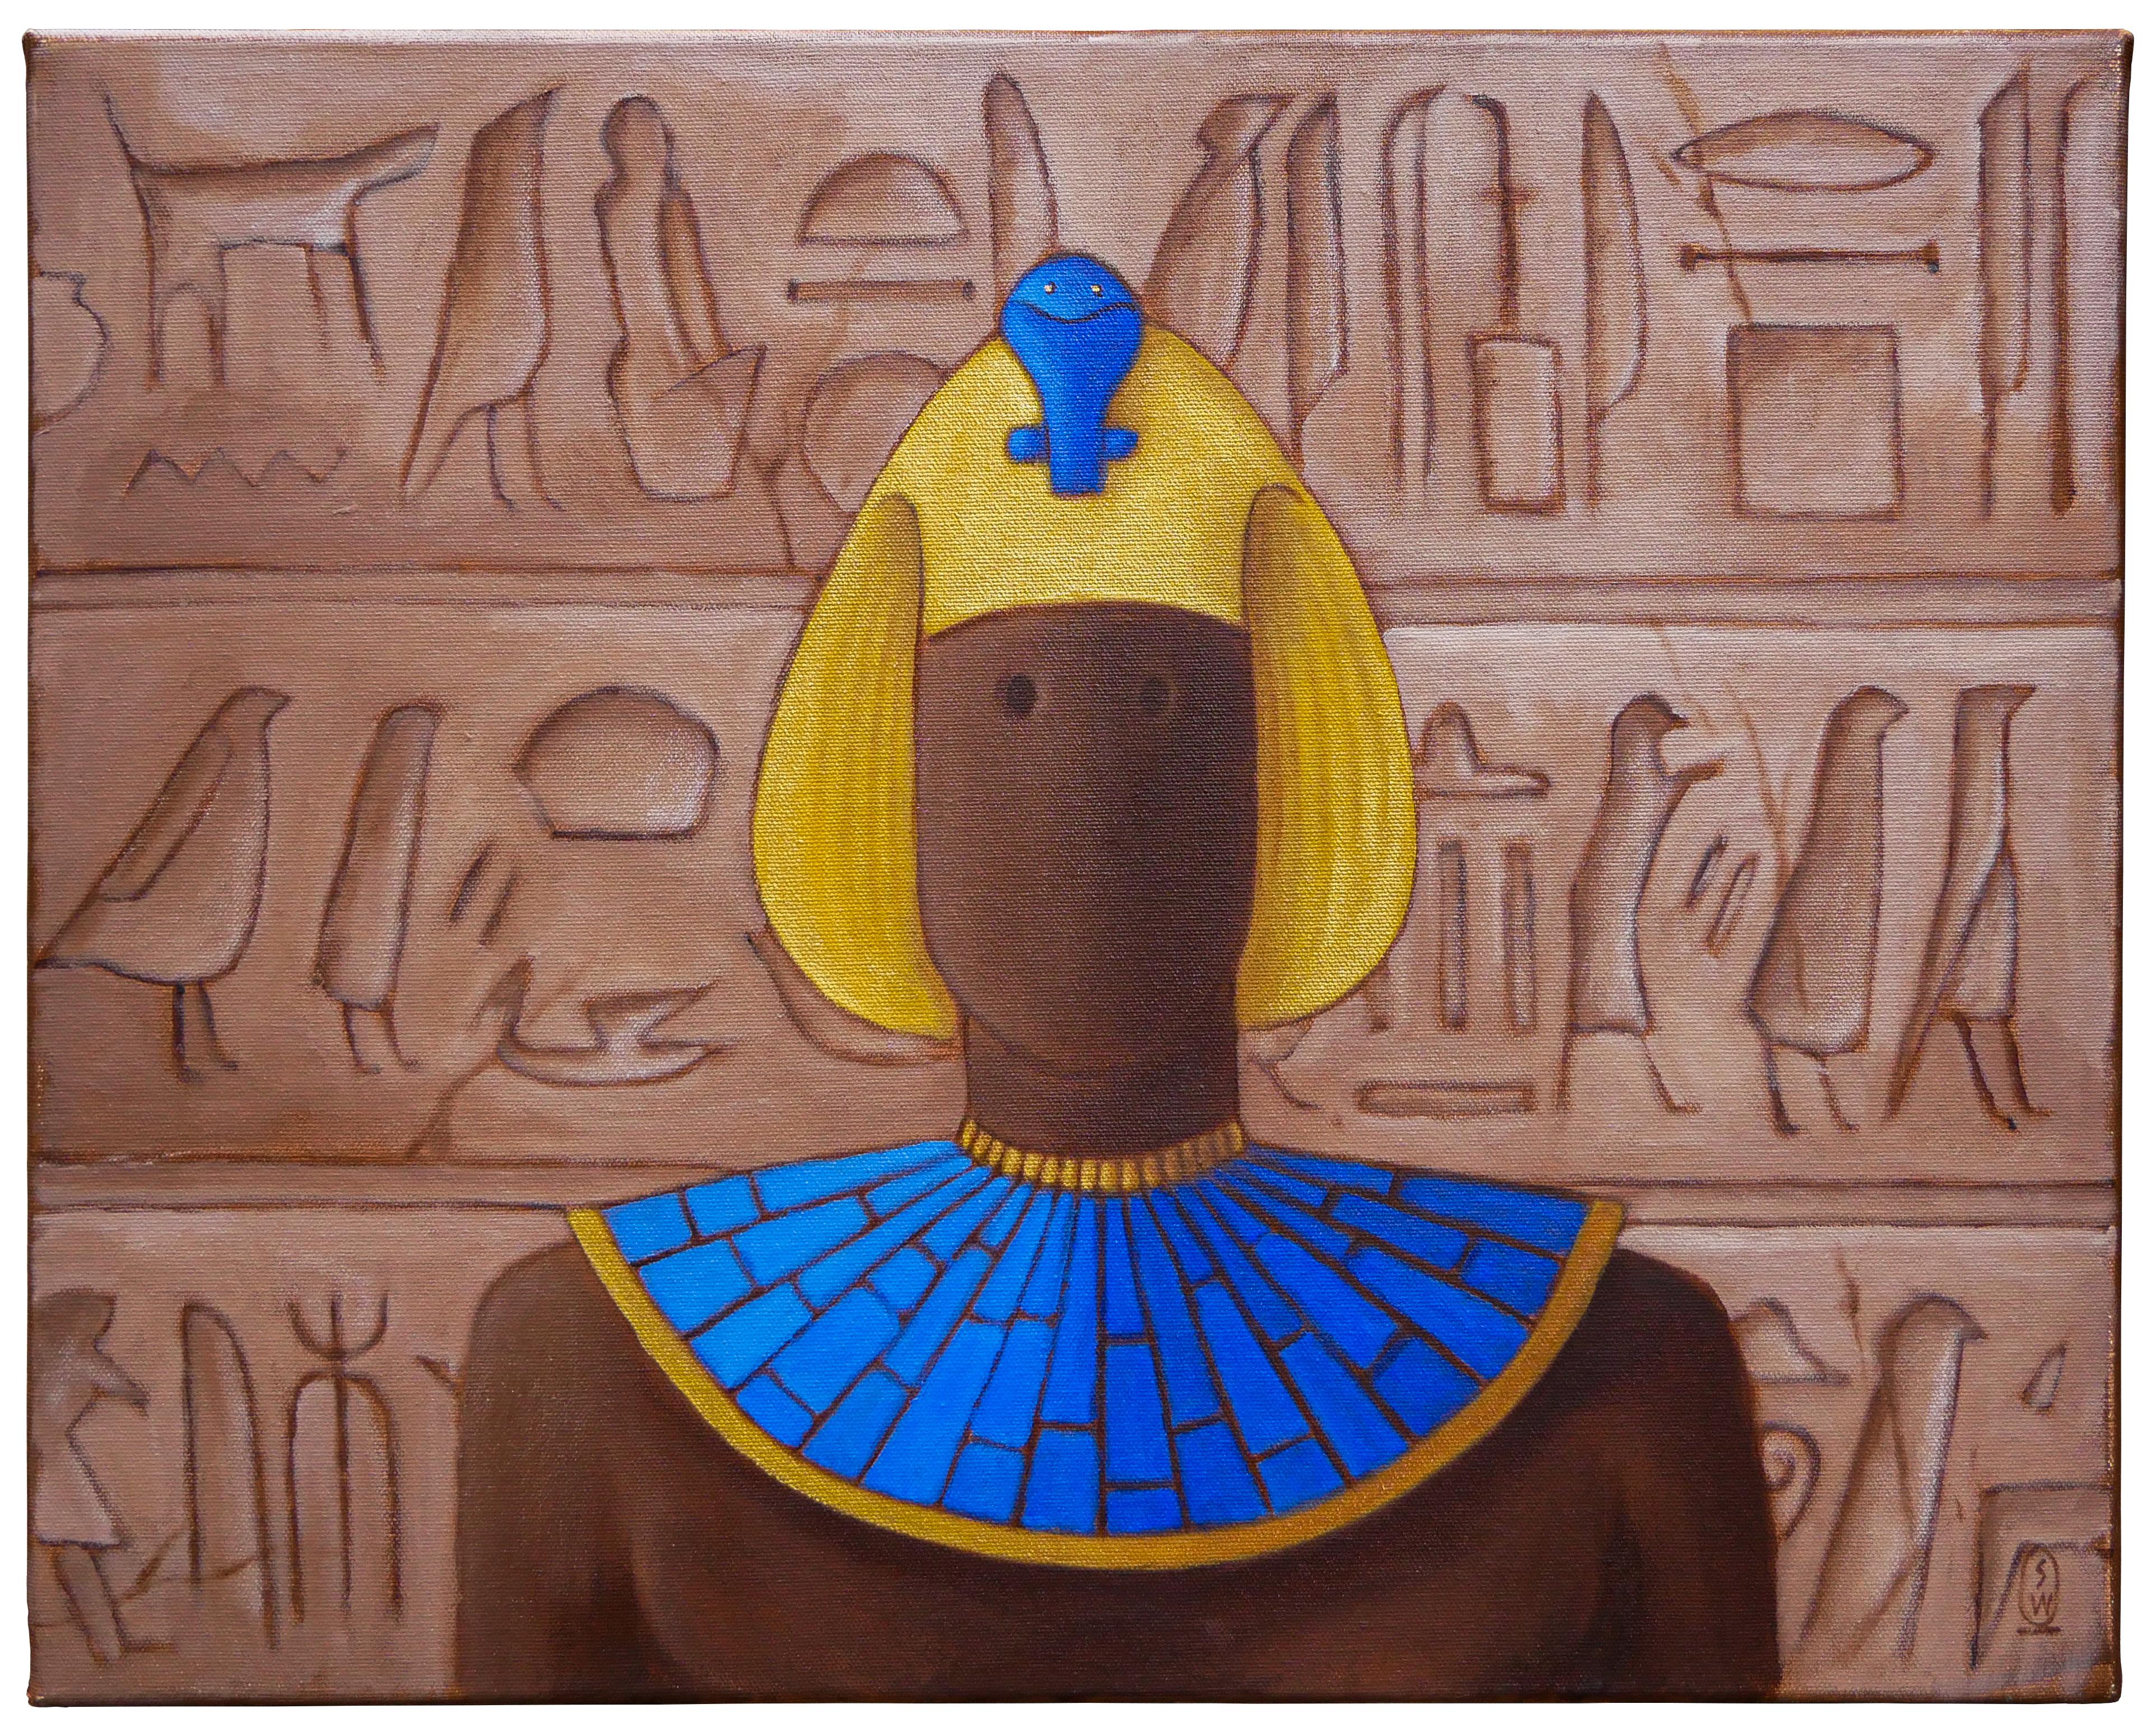 Scott Woodard Abstract Painting - “The Pharaoh’s Lover” Blue and Brown Abstract Figurative Contemporary Painting